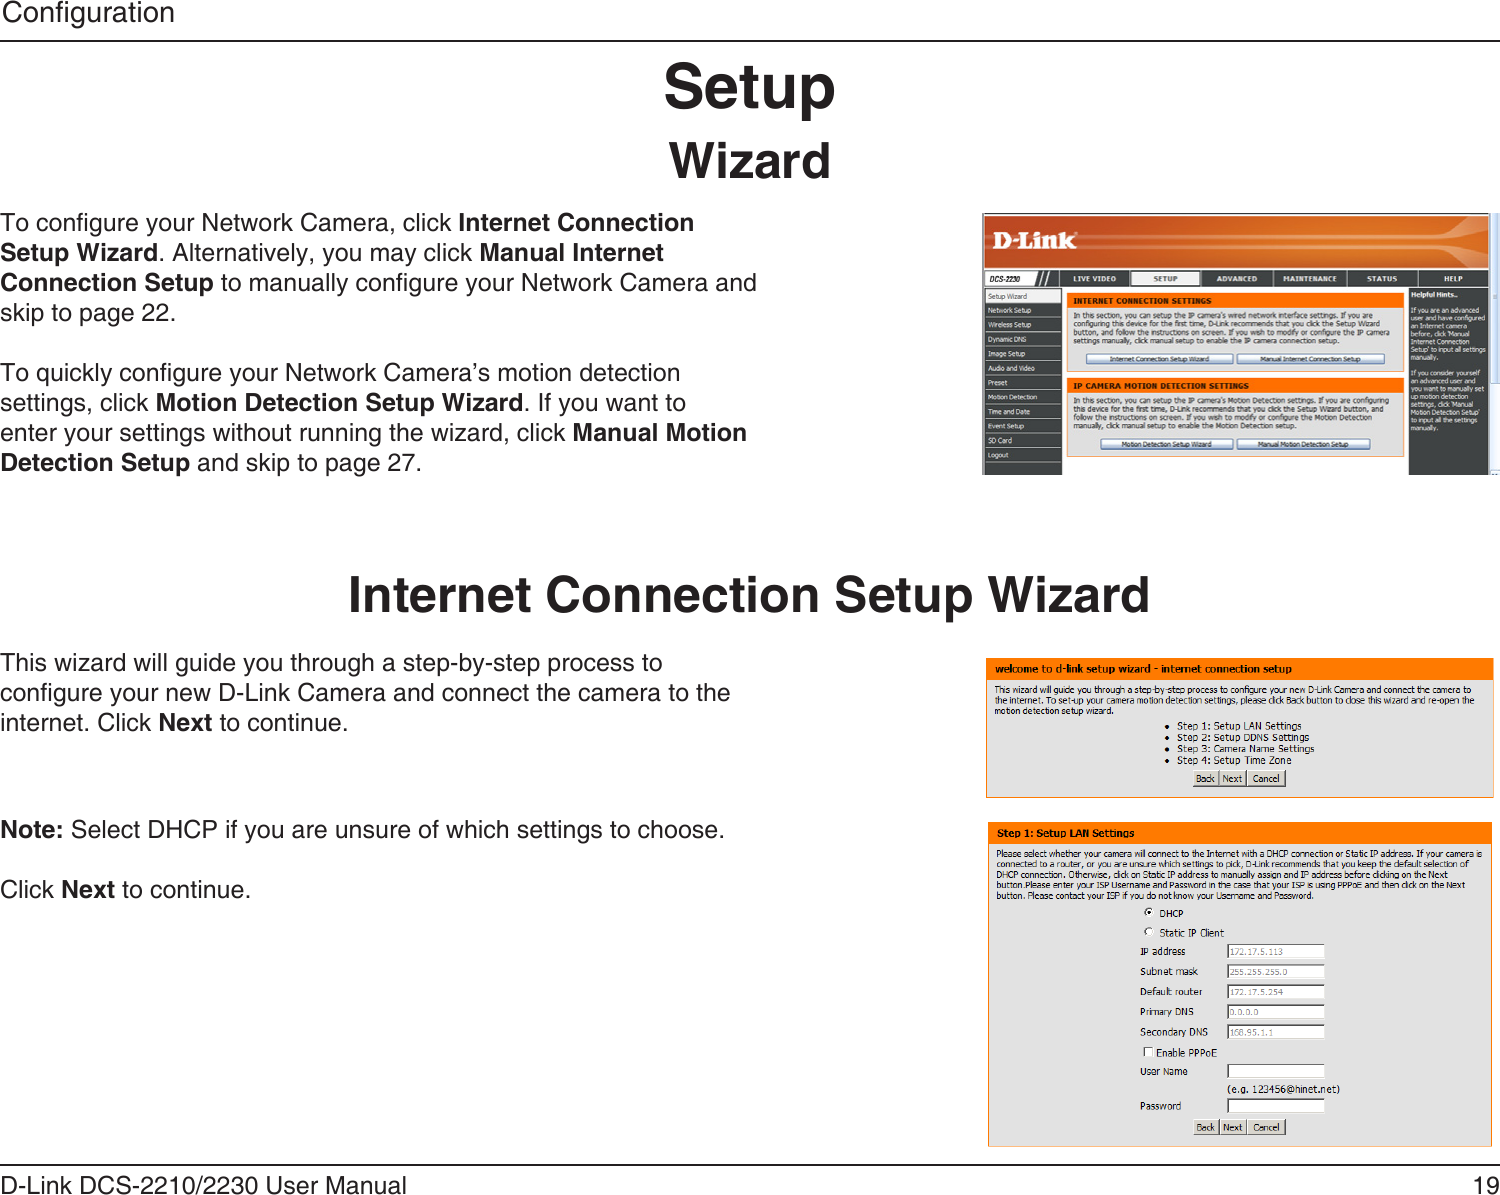 19D-Link DCS-2210/2230 User ManualCongurationSetupWizardTo congure your Network Camera, click Internet Connection Setup Wizard. Alternatively, you may click Manual Internet Connection Setup to manually congure your Network Camera and skip to page 22.To quickly congure your Network Camera’s motion detection settings, click Motion Detection Setup Wizard. If you want to enter your settings without running the wizard, click Manual Motion Detection Setup and skip to page 27.Internet Connection Setup WizardThis wizard will guide you through a step-by-step process to congure your new D-Link Camera and connect the camera to the internet. Click Next to continue.Note: Select DHCP if you are unsure of which settings to choose.Click Next to continue.